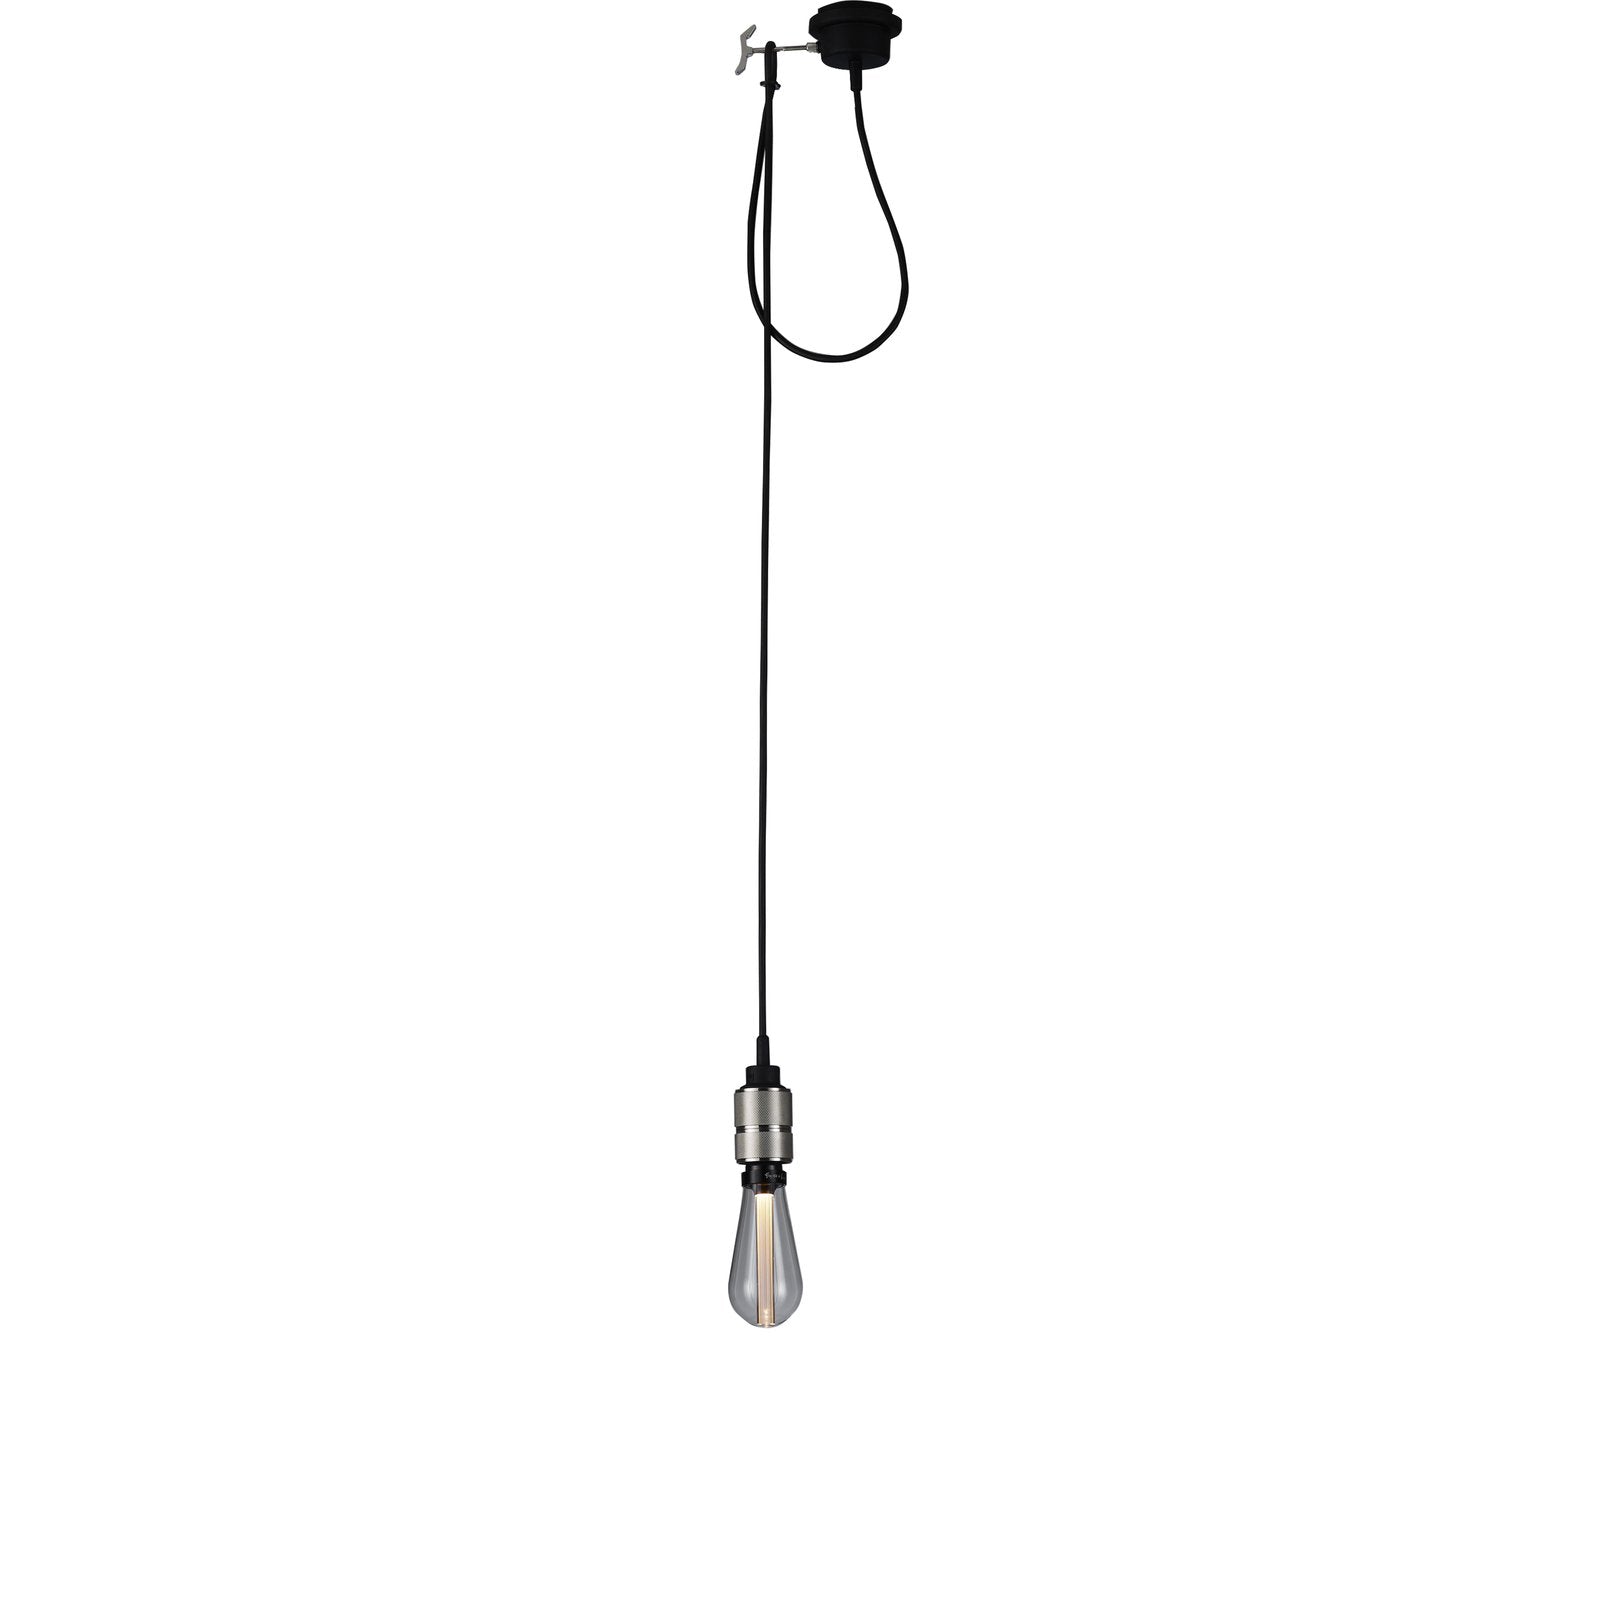 Buster and Punch - Hooked 1.0 / Nude 2.0m Hanglamp - KOOT